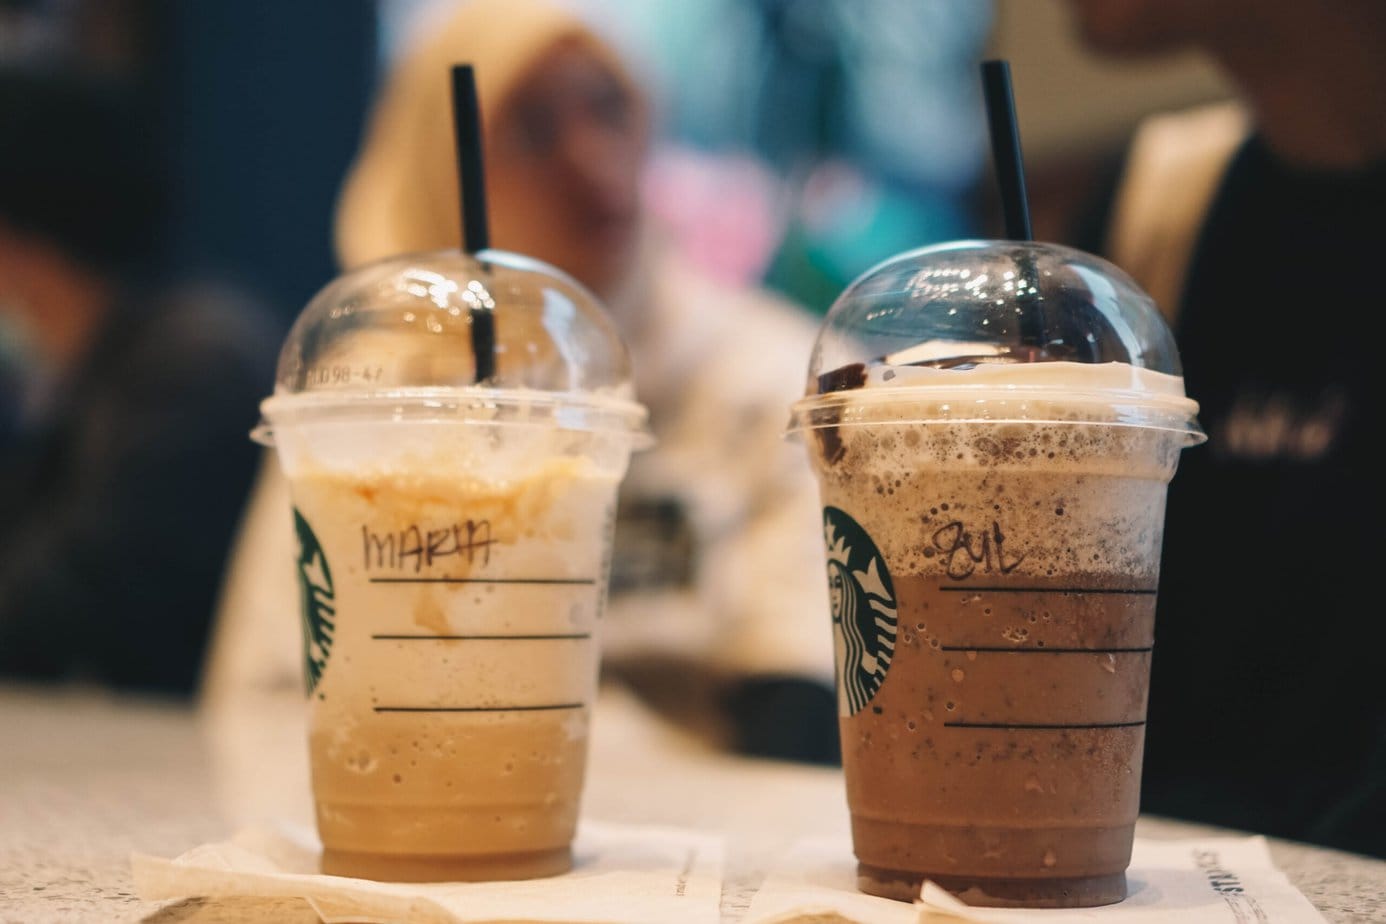 Starbucks Frappuccino drinks on the table 